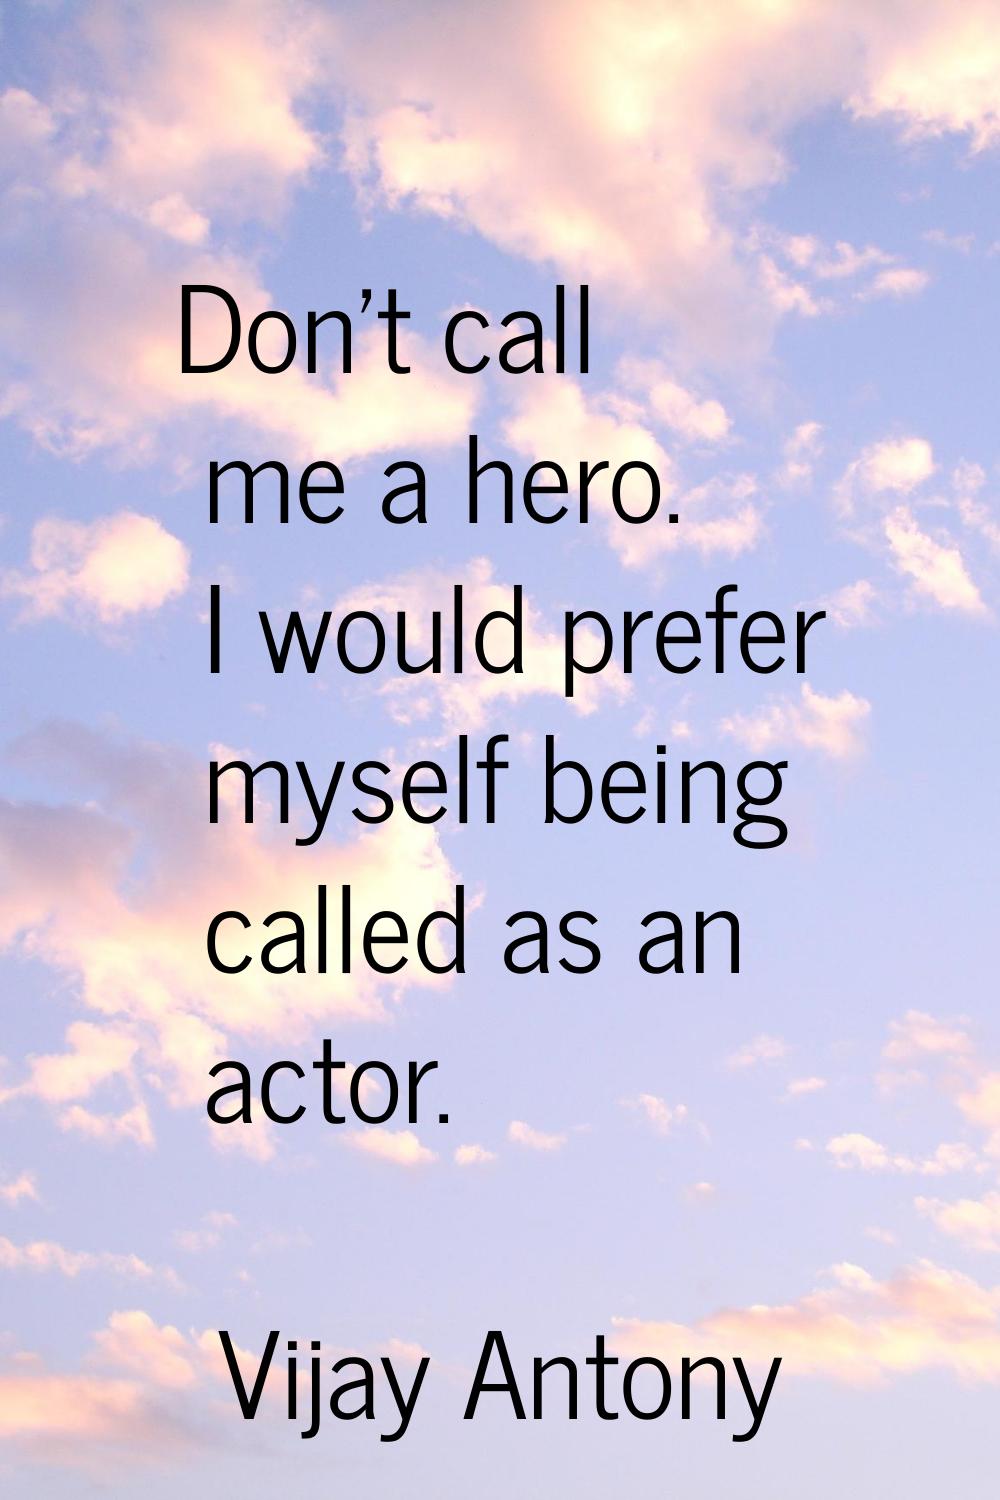 Don't call me a hero. I would prefer myself being called as an actor.